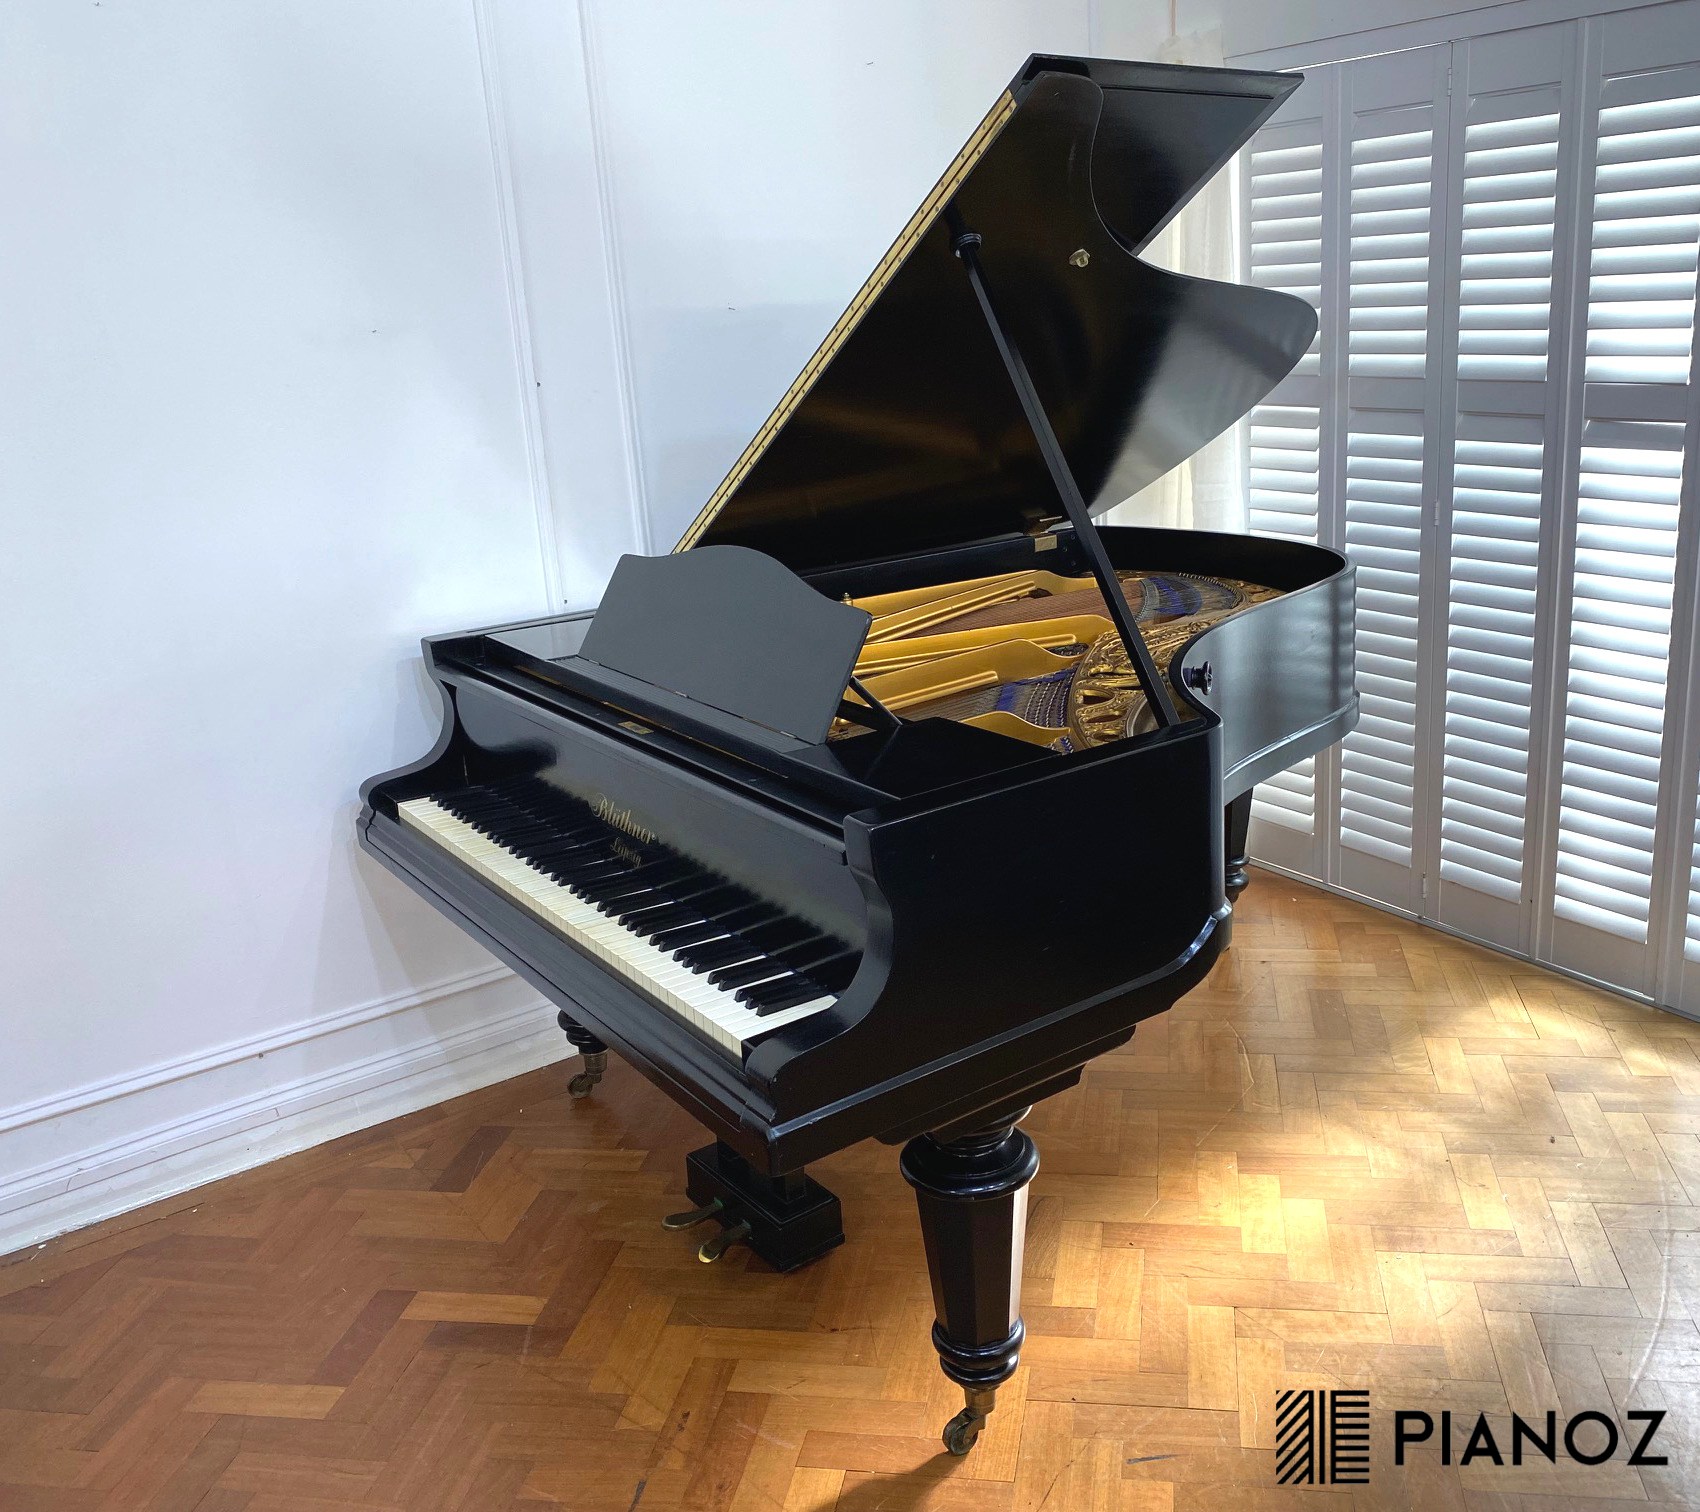 Bluthner Jubilee Restored Grand Piano piano for sale in UK